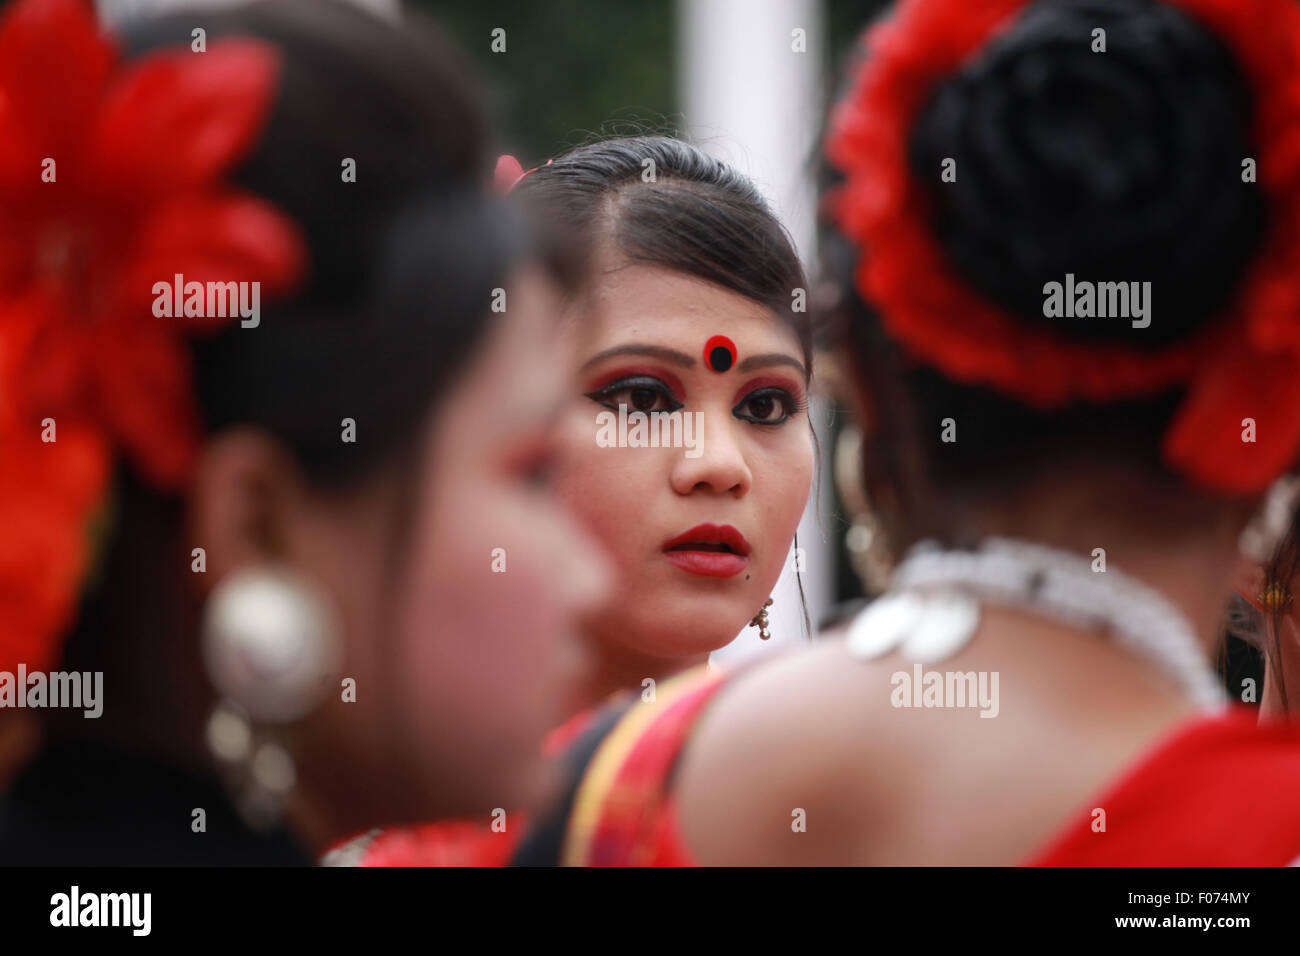 Dhaka, Bangladesh. 9th August, 2015. Bangladeshi indegenious women participate in a gathering in Dhaka held to celebrate United Nations' (UN) International Day of the World's Indigenous People. The event is observed to promote and protect the rights of the indigenous communities rich and diverse cultures  in Dhaka on August 8, 2015.  This year United Ntions make slogan for ths day is 'Ensuring indigenous peoples' health and well-being'. Credit:  zakir hossain chowdhury zakir/Alamy Live News Stock Photo